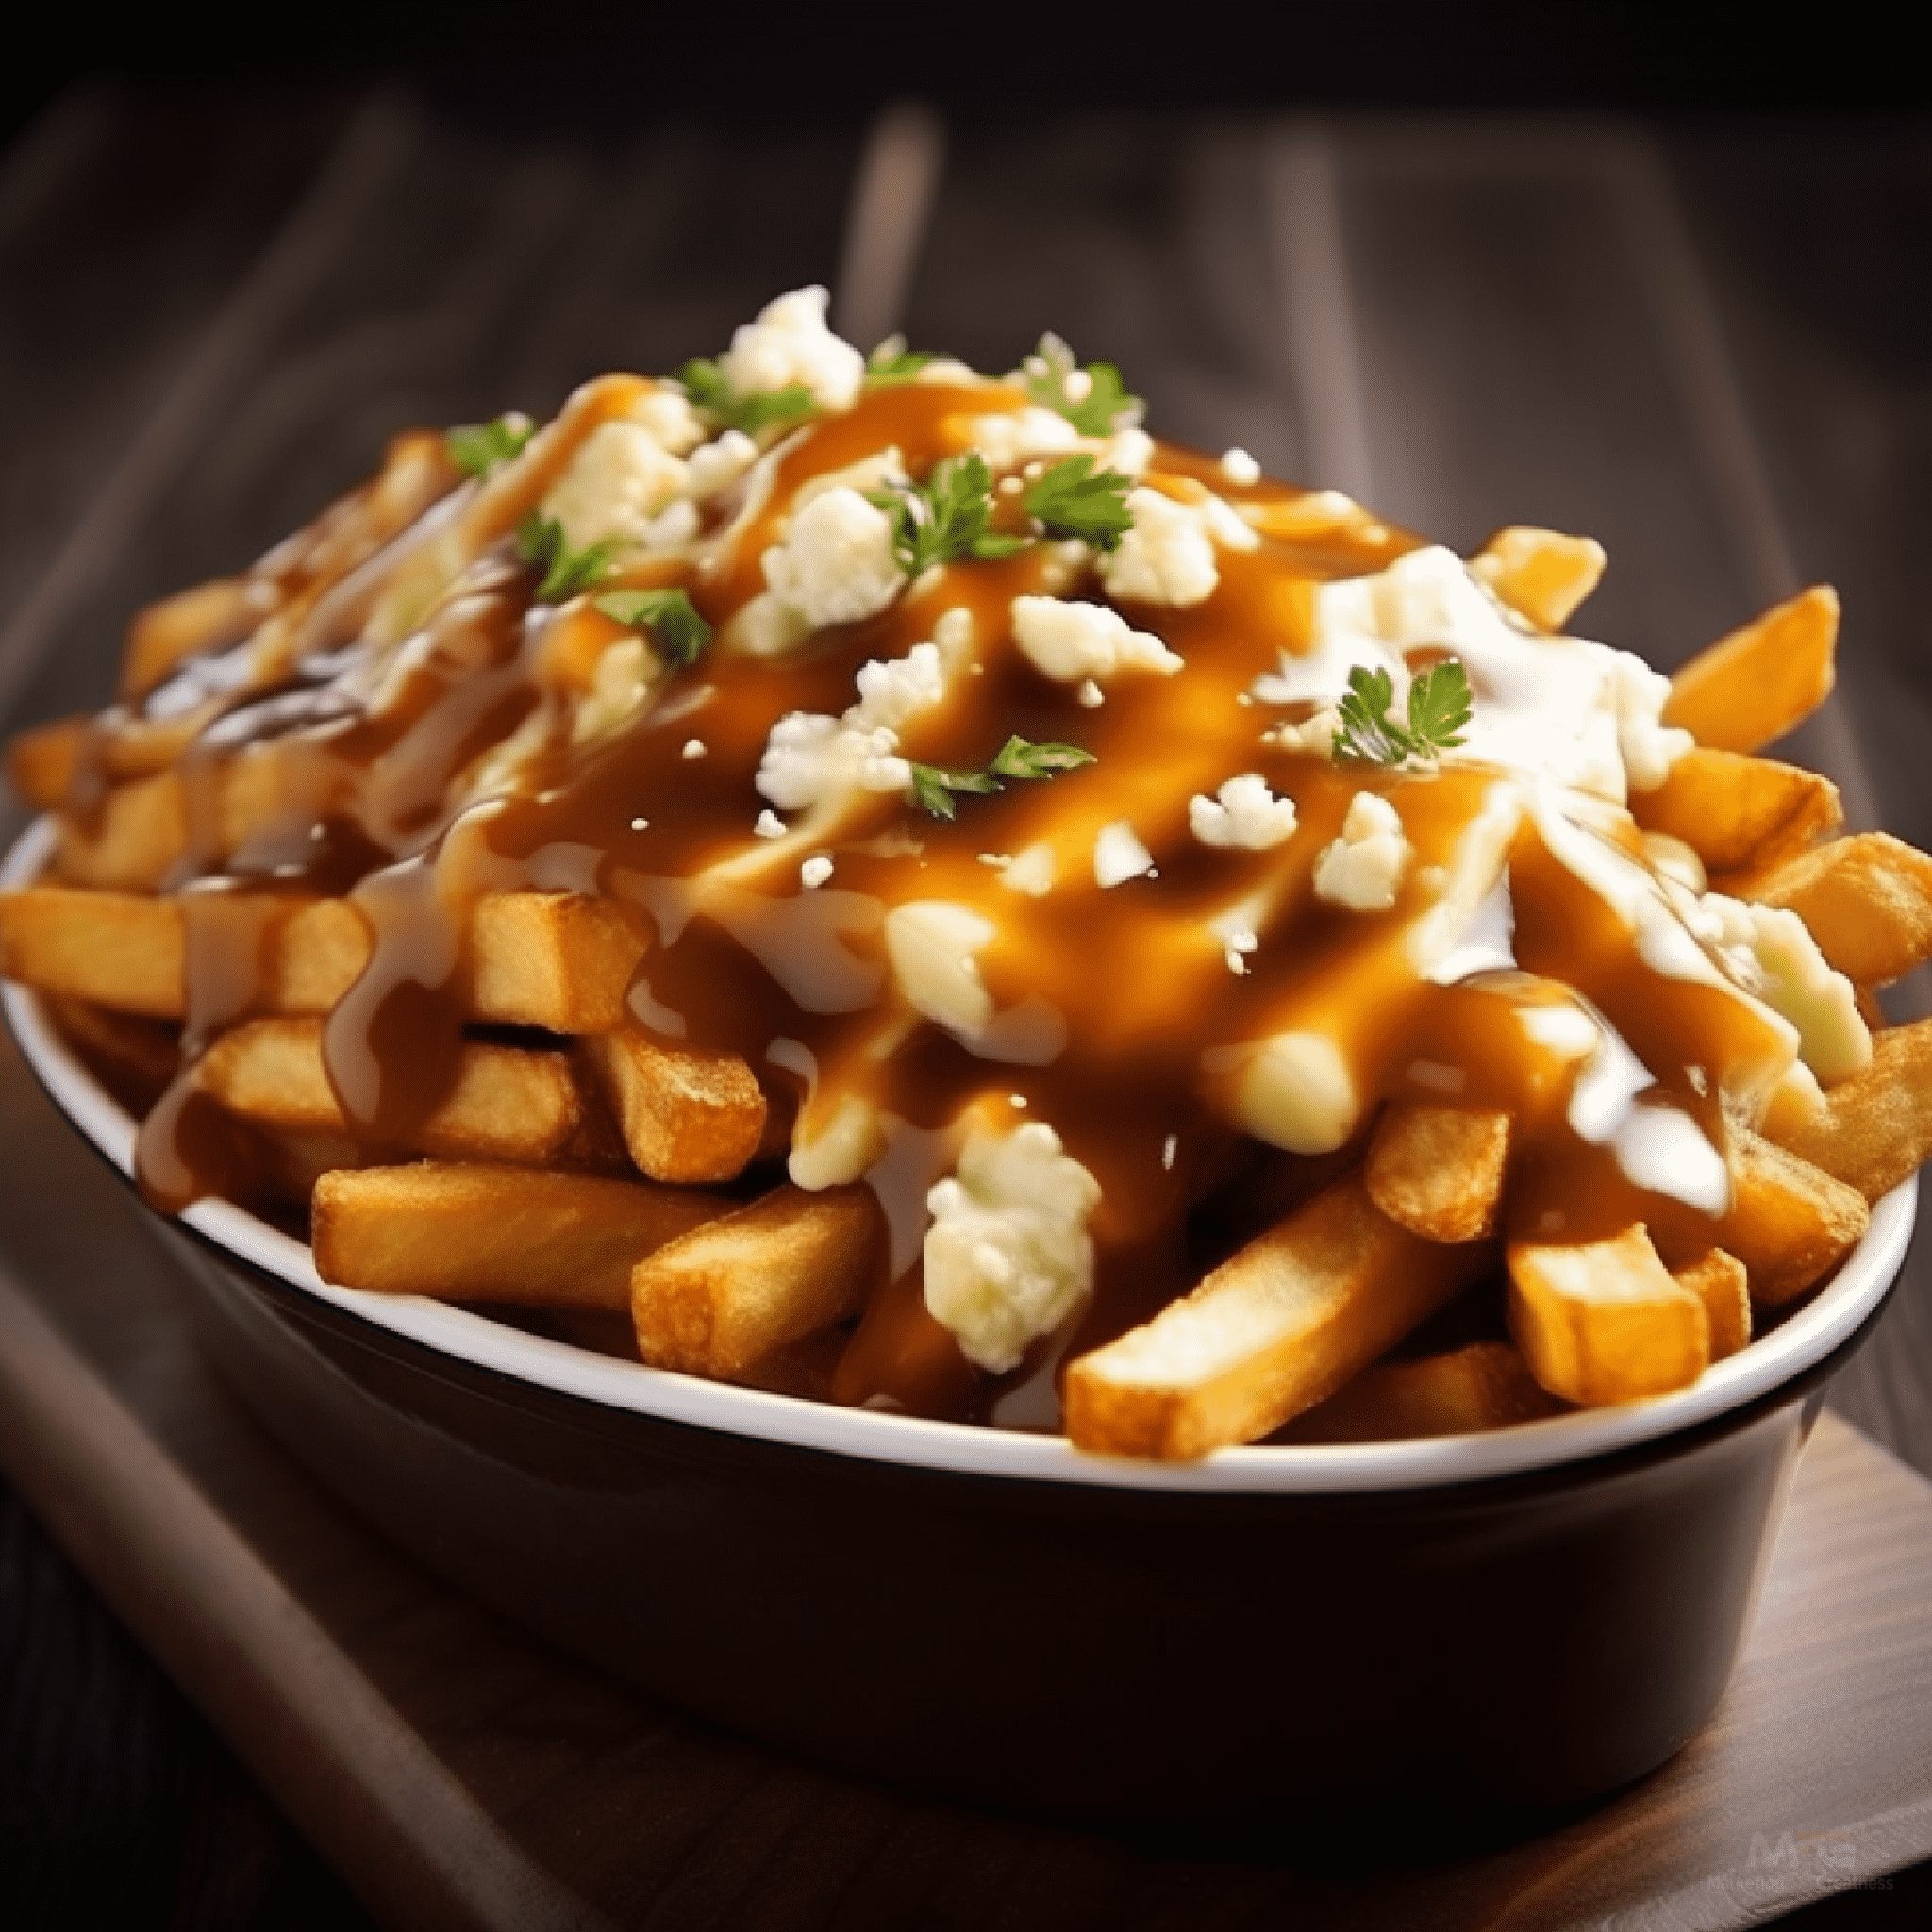 Poutine (Canada): This Quebecois comfort food features fries smothered in cheese curds and topped with rich gravy.